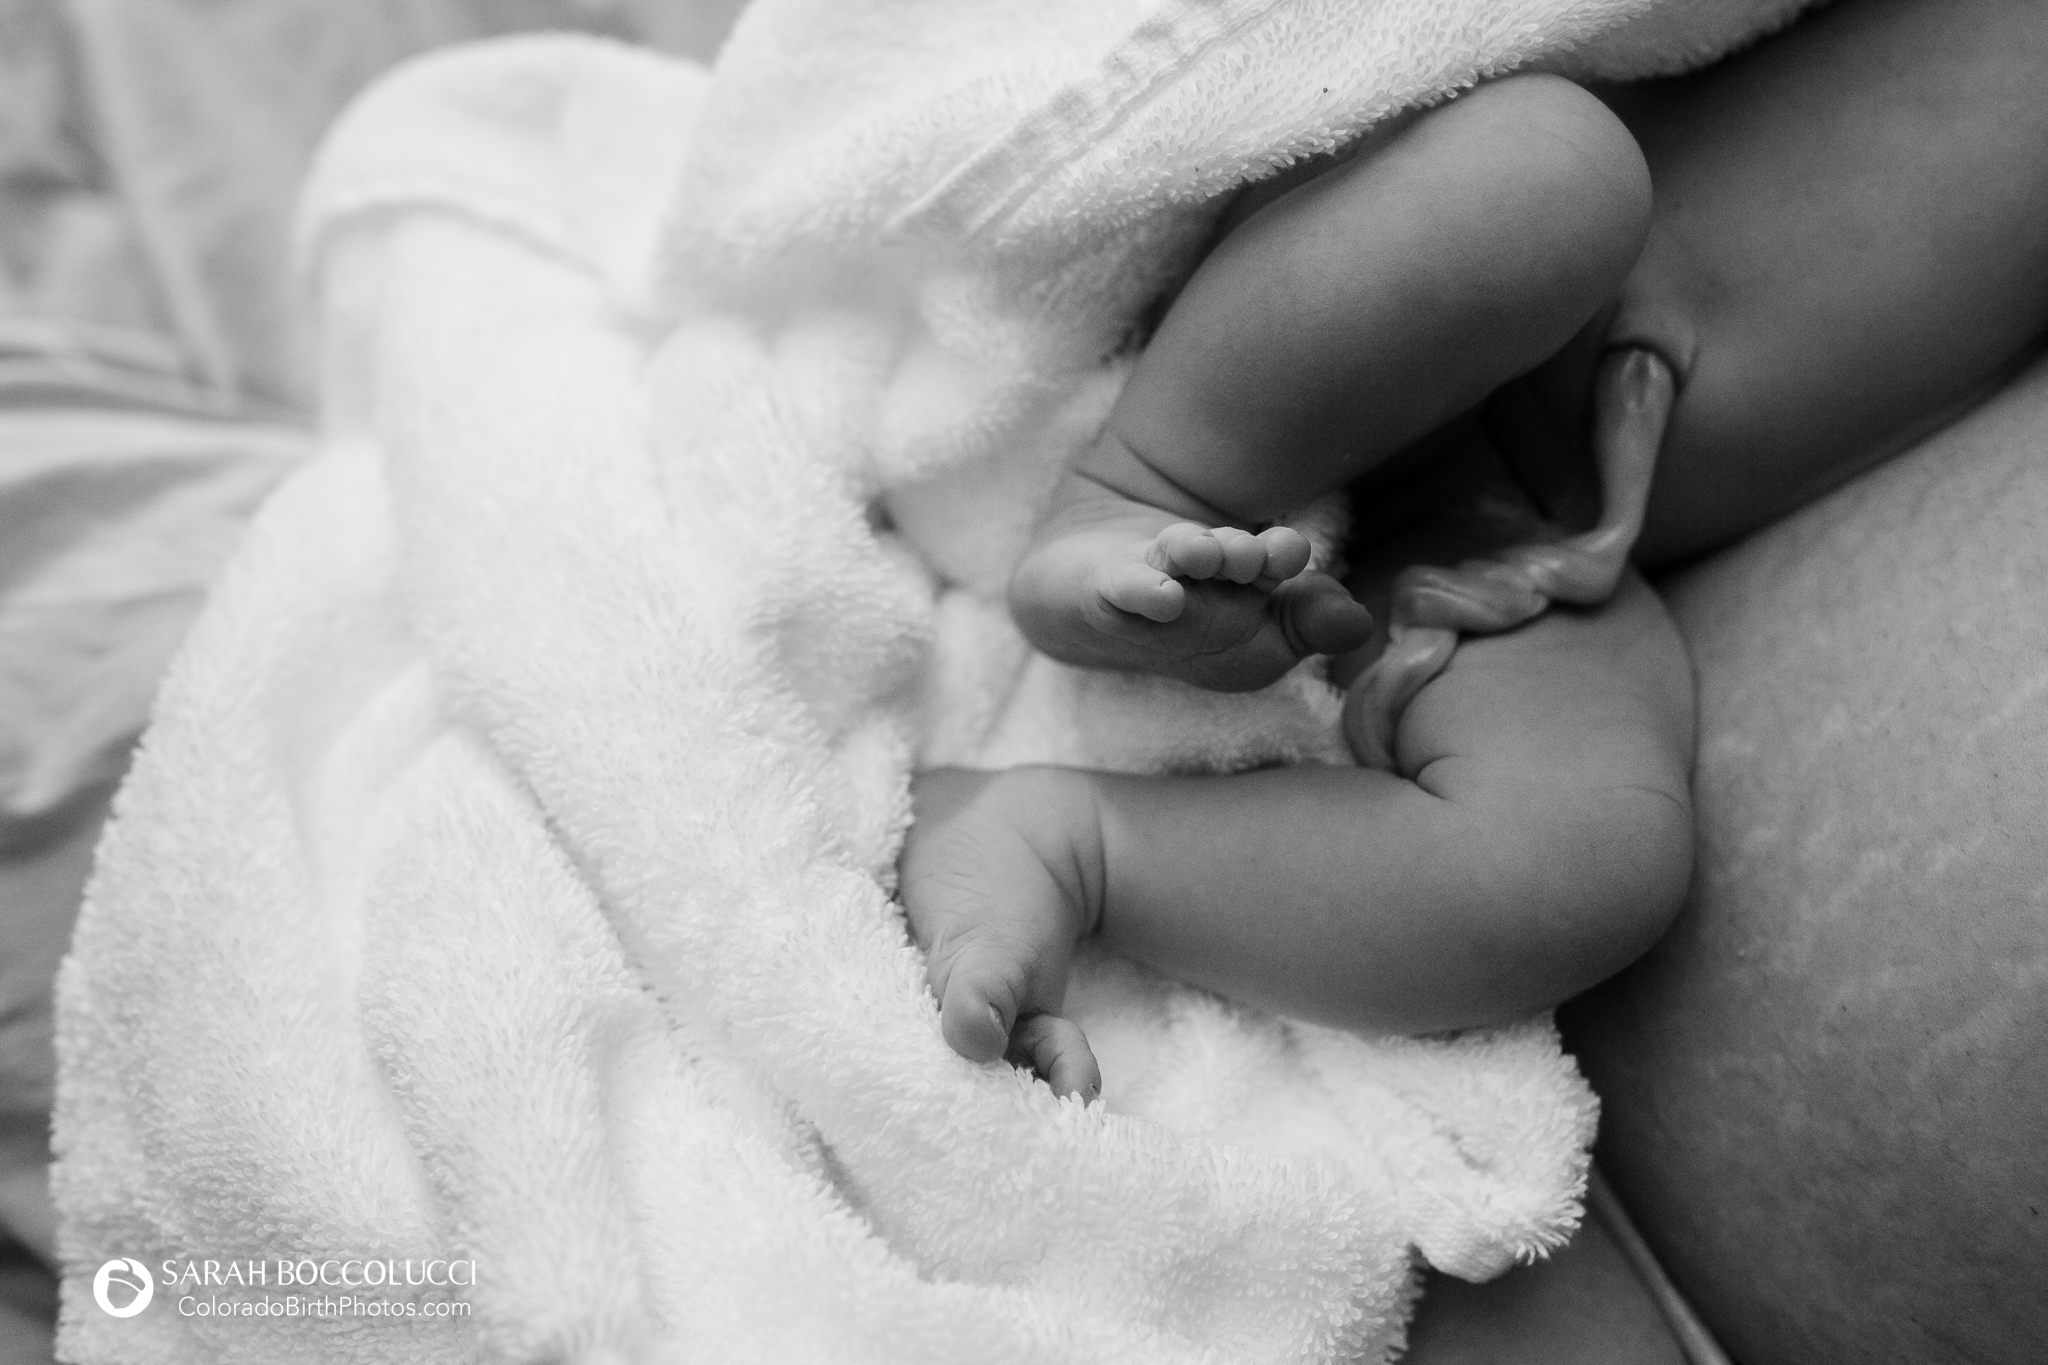 Delayed cord clamping